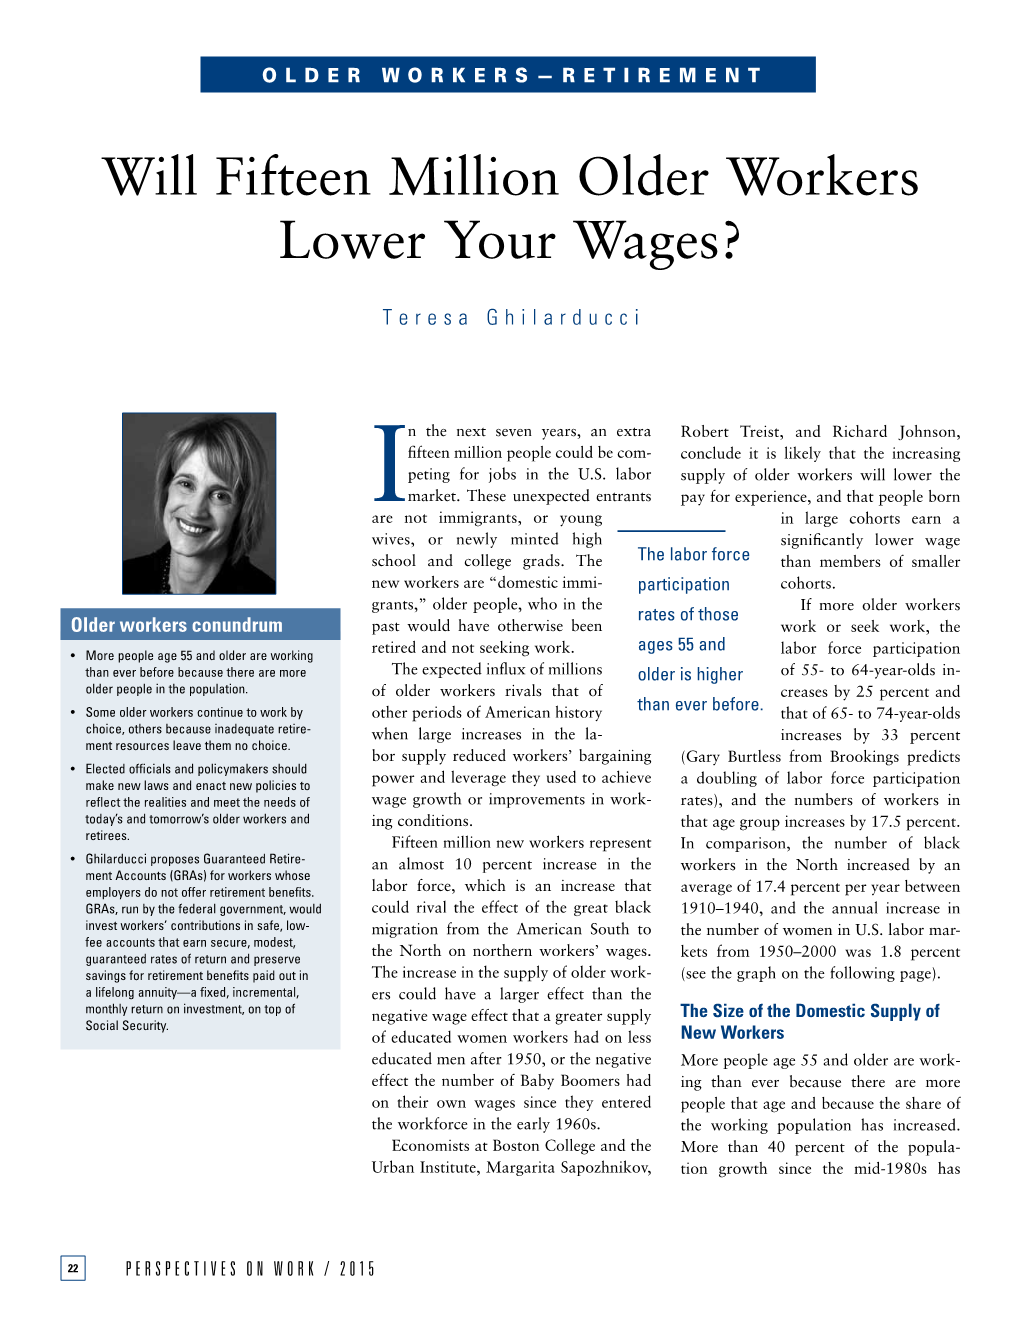 Will Fifteen Million Older Workers Lower Your Wages?